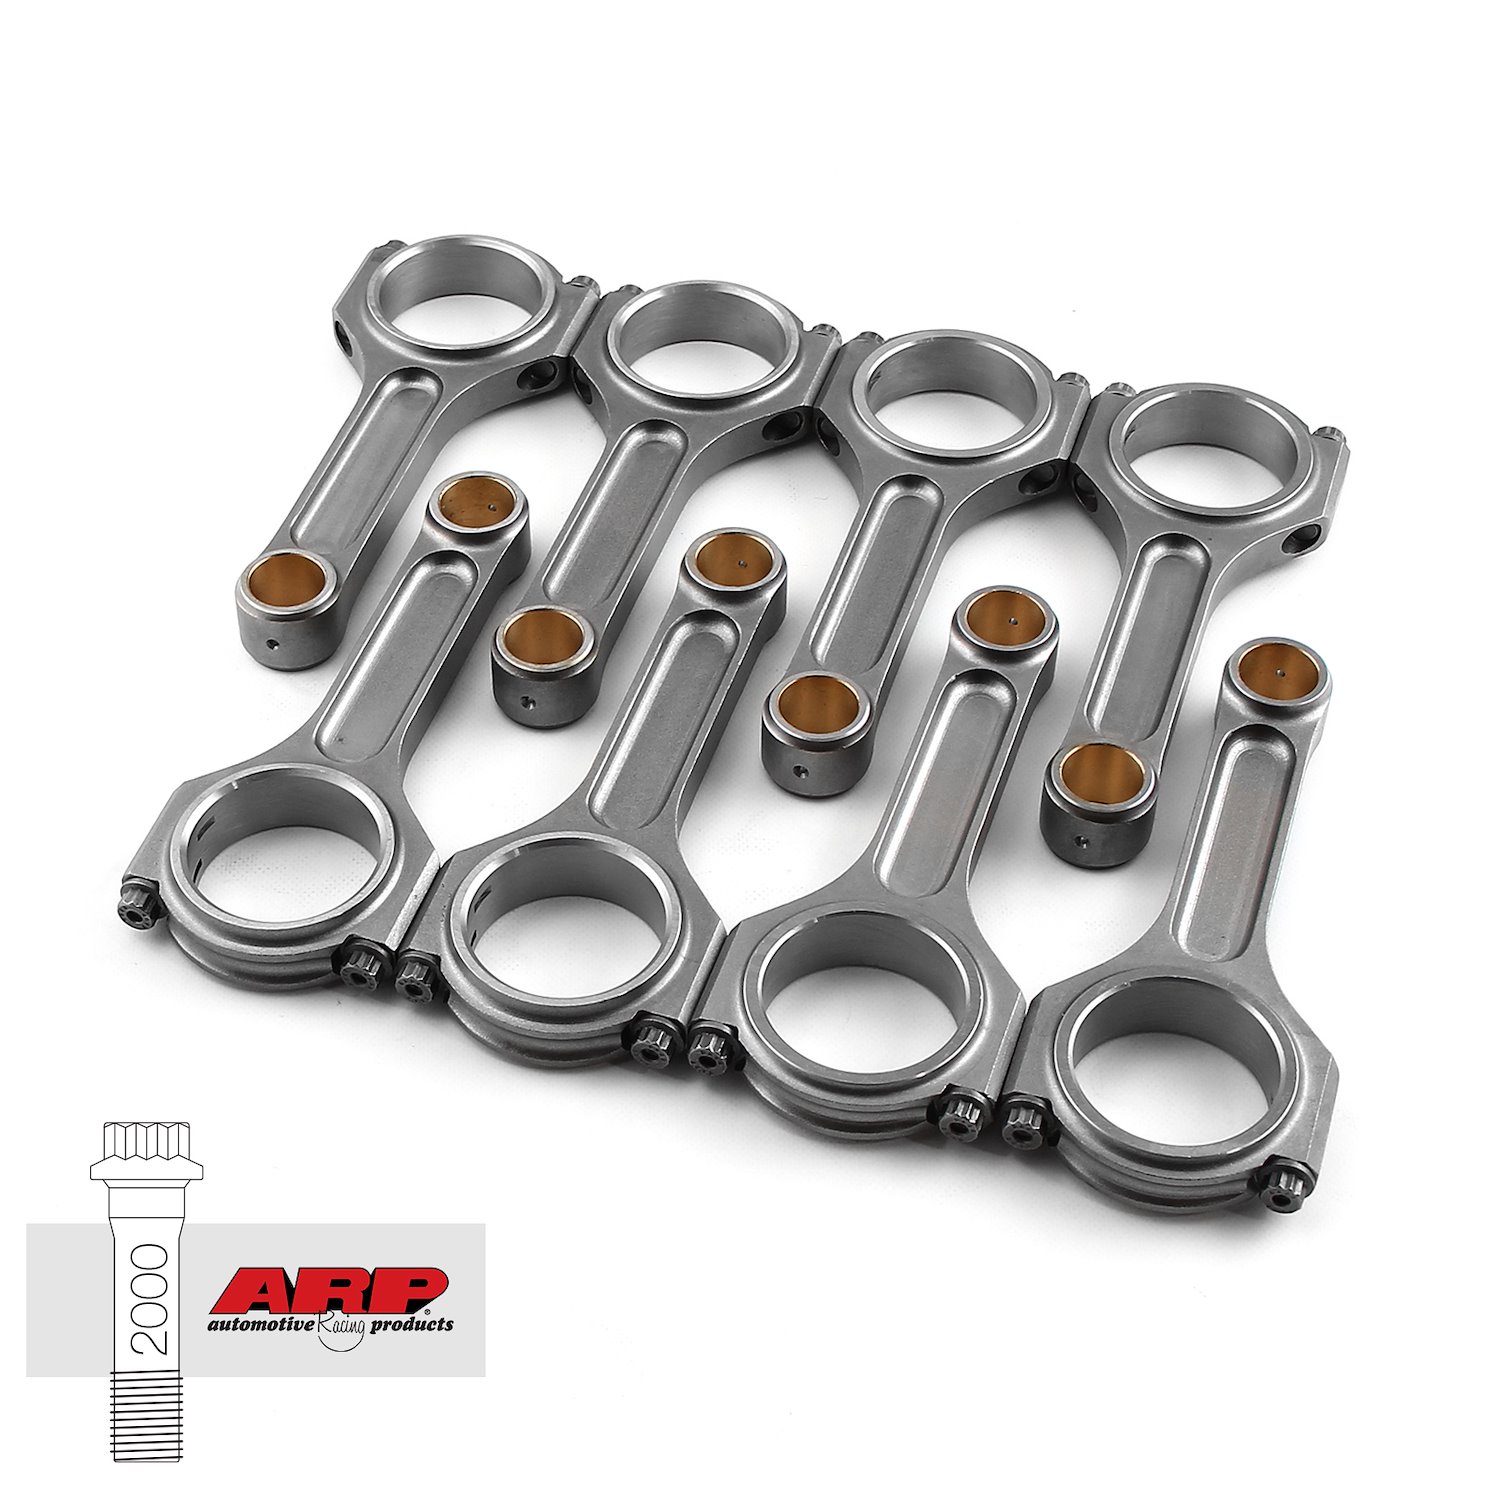 I BEAM PRO 5.933 2.087 .866 4340 CONNECTING RODS FORD 4.6L W/ ARP 2000